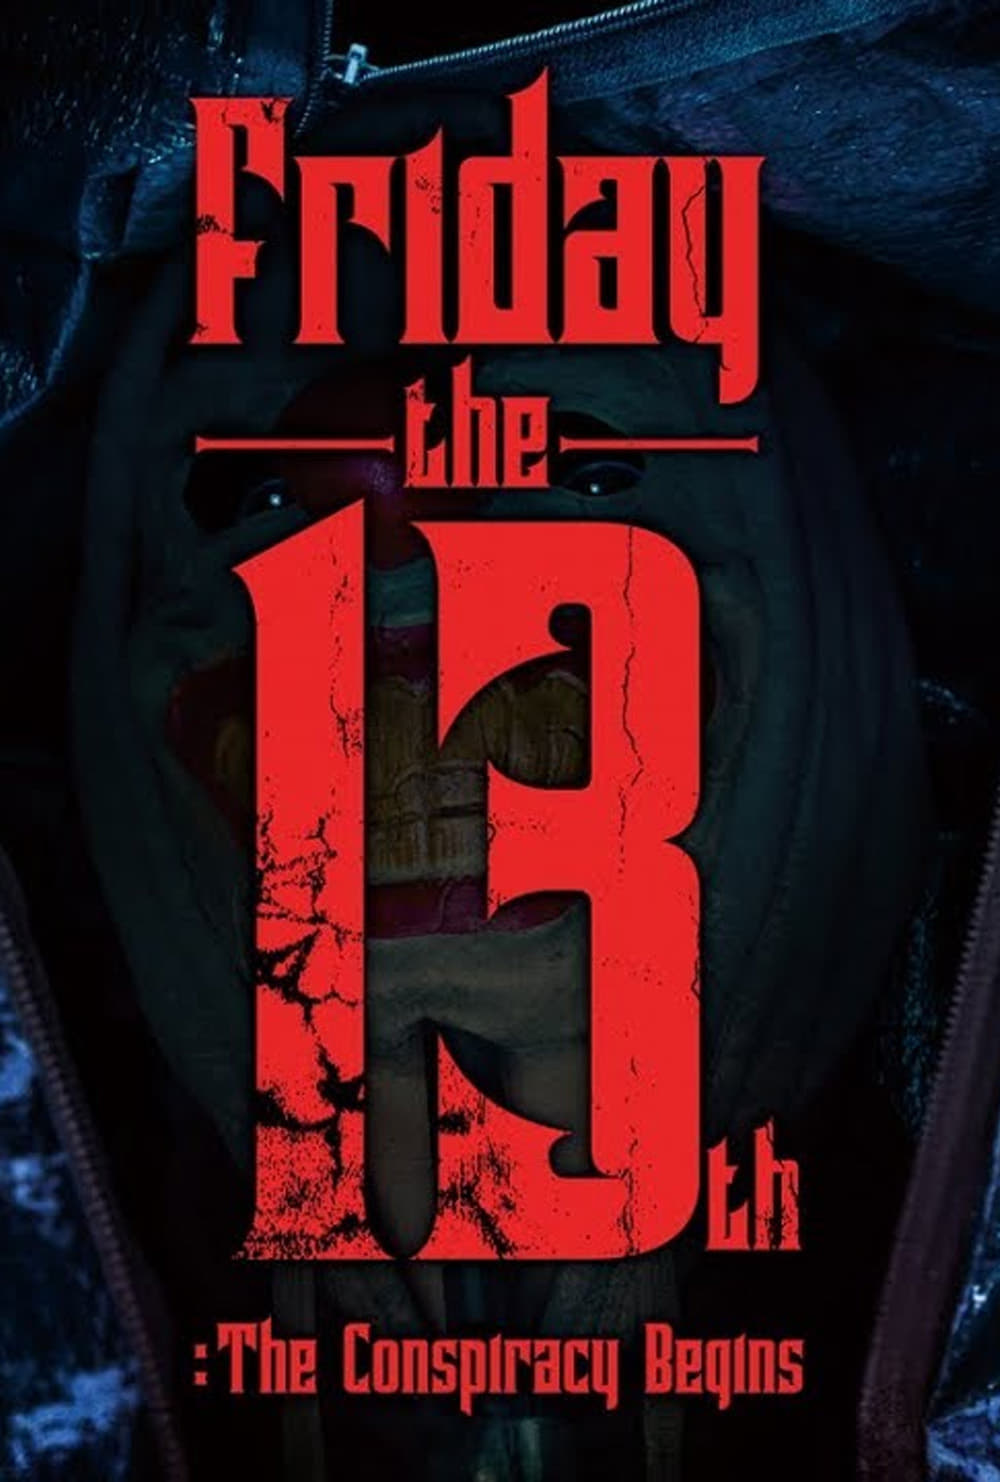 Friday the 13th : The Conspiracy Begins